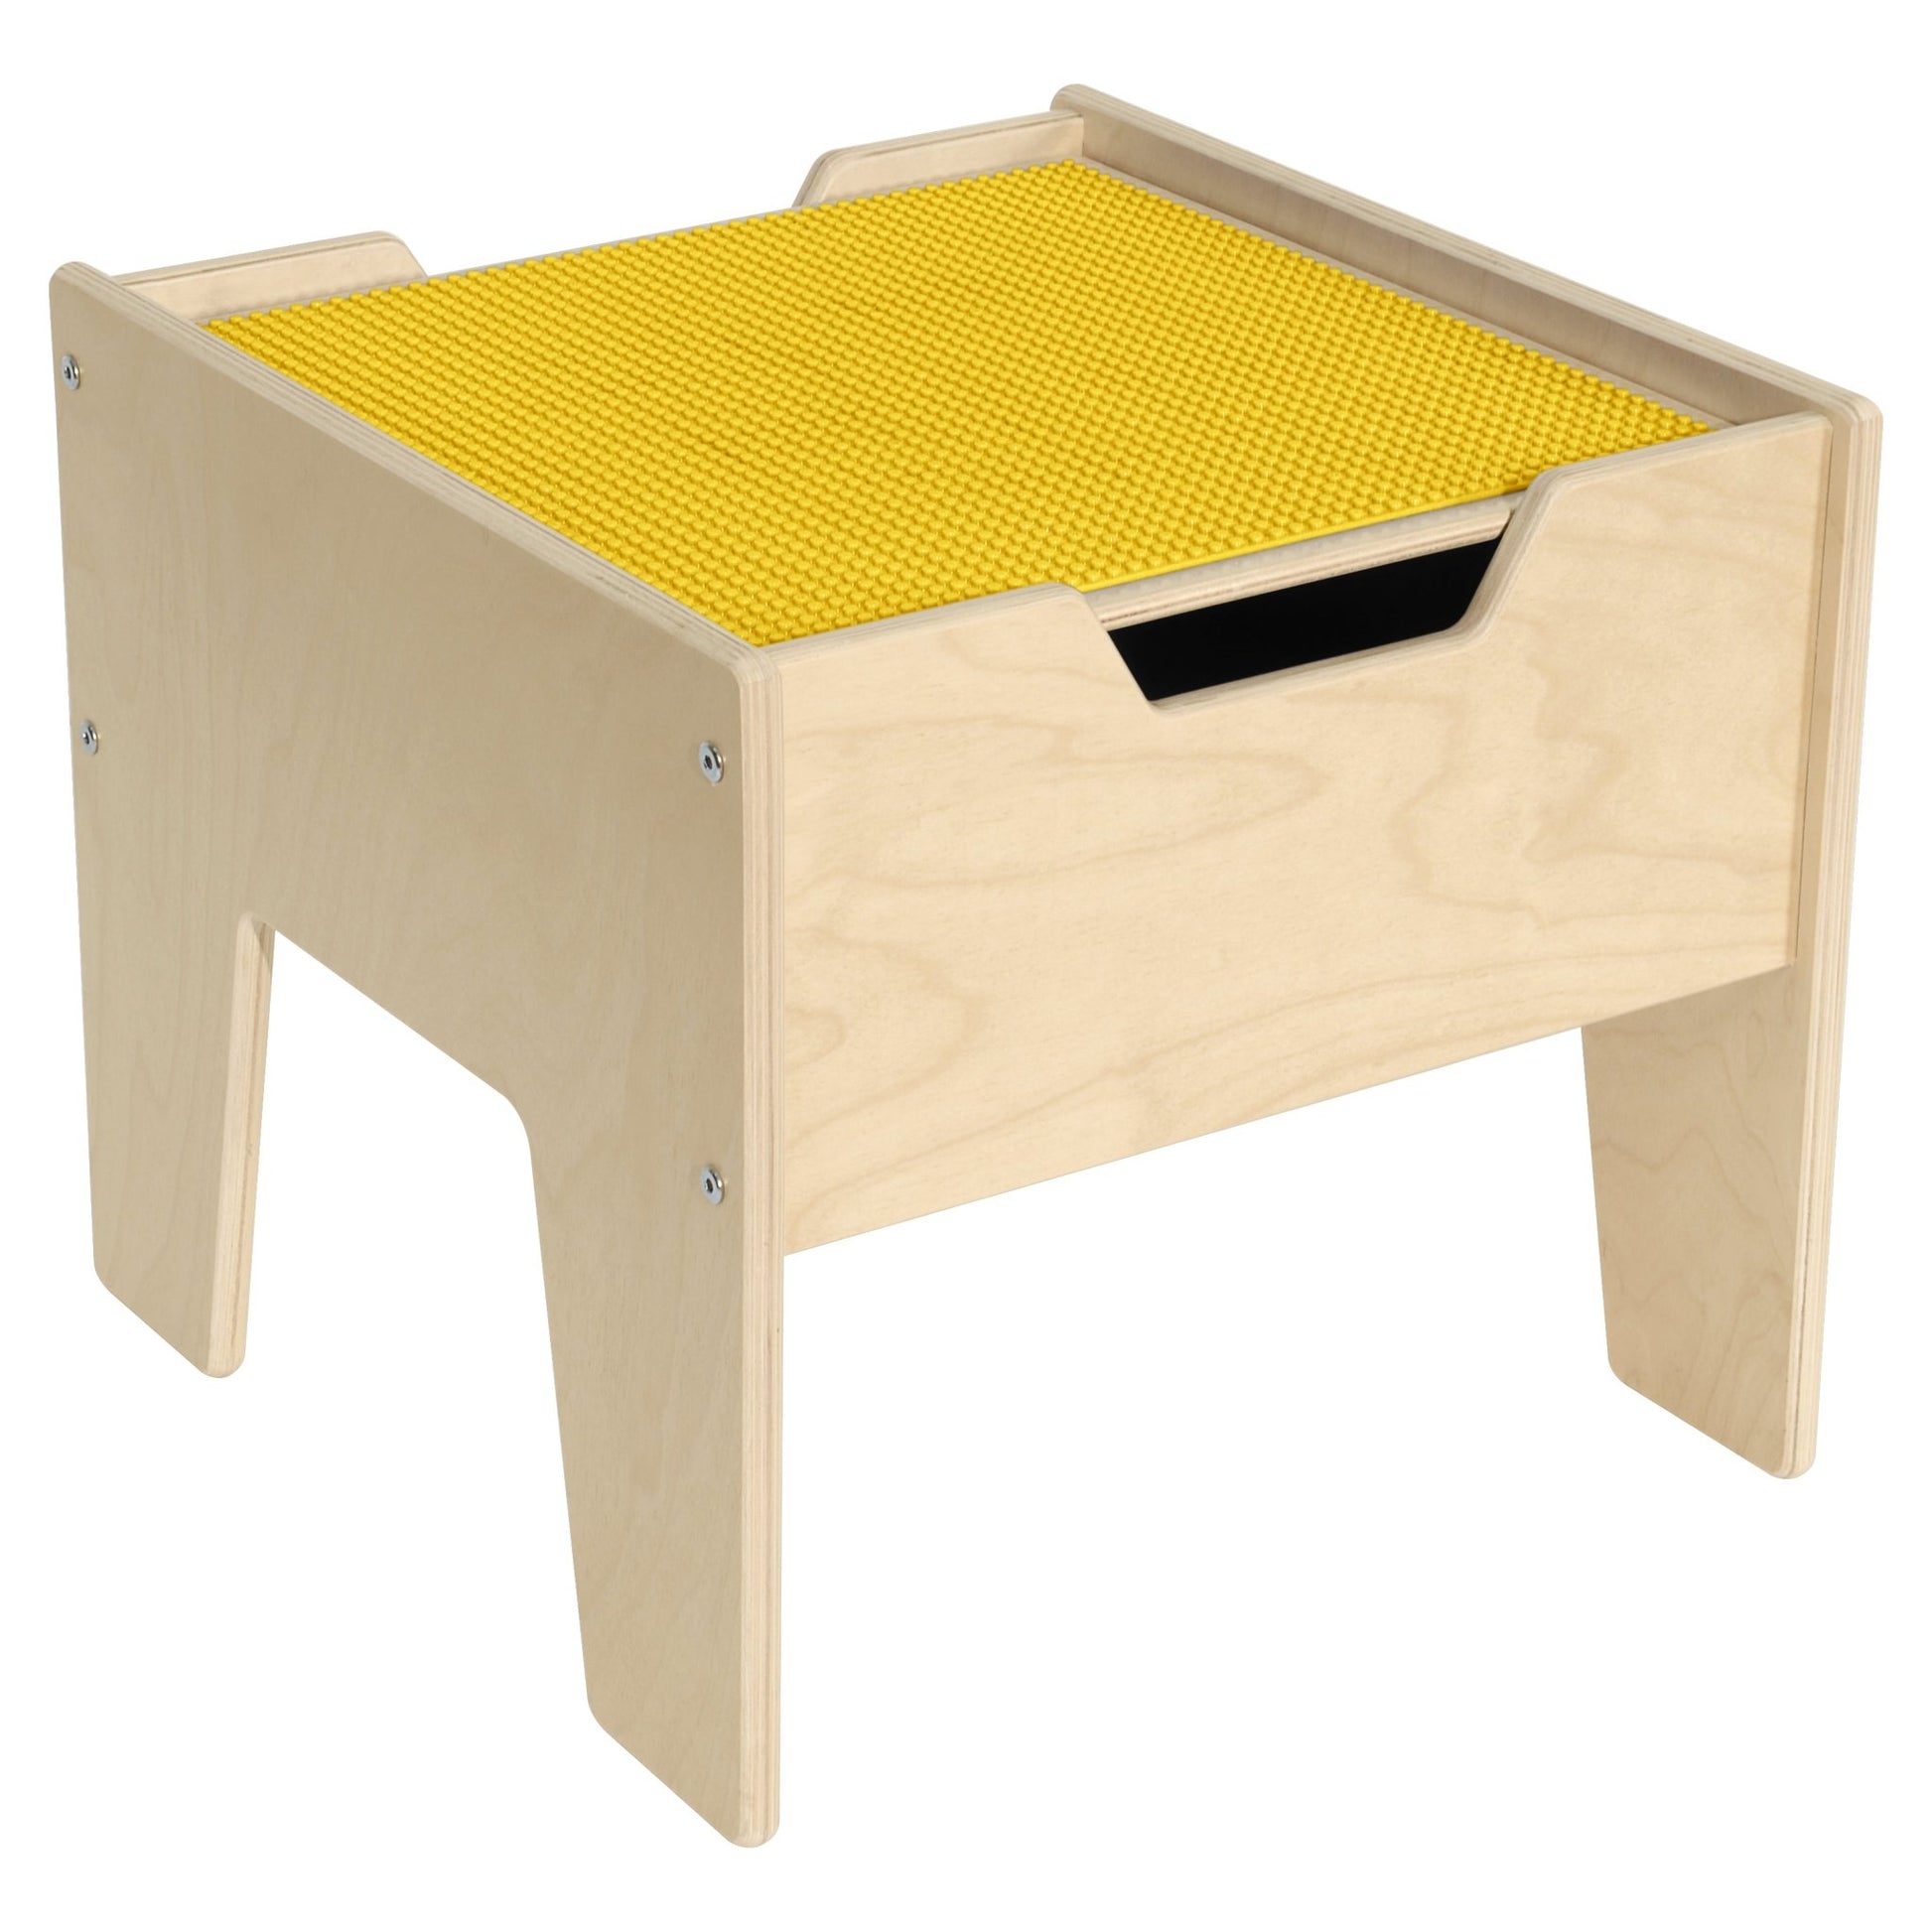 Wood Designs Contender 2-N-1 Activity Table with LEGO® Compatible Top - (C991300) - SchoolOutlet